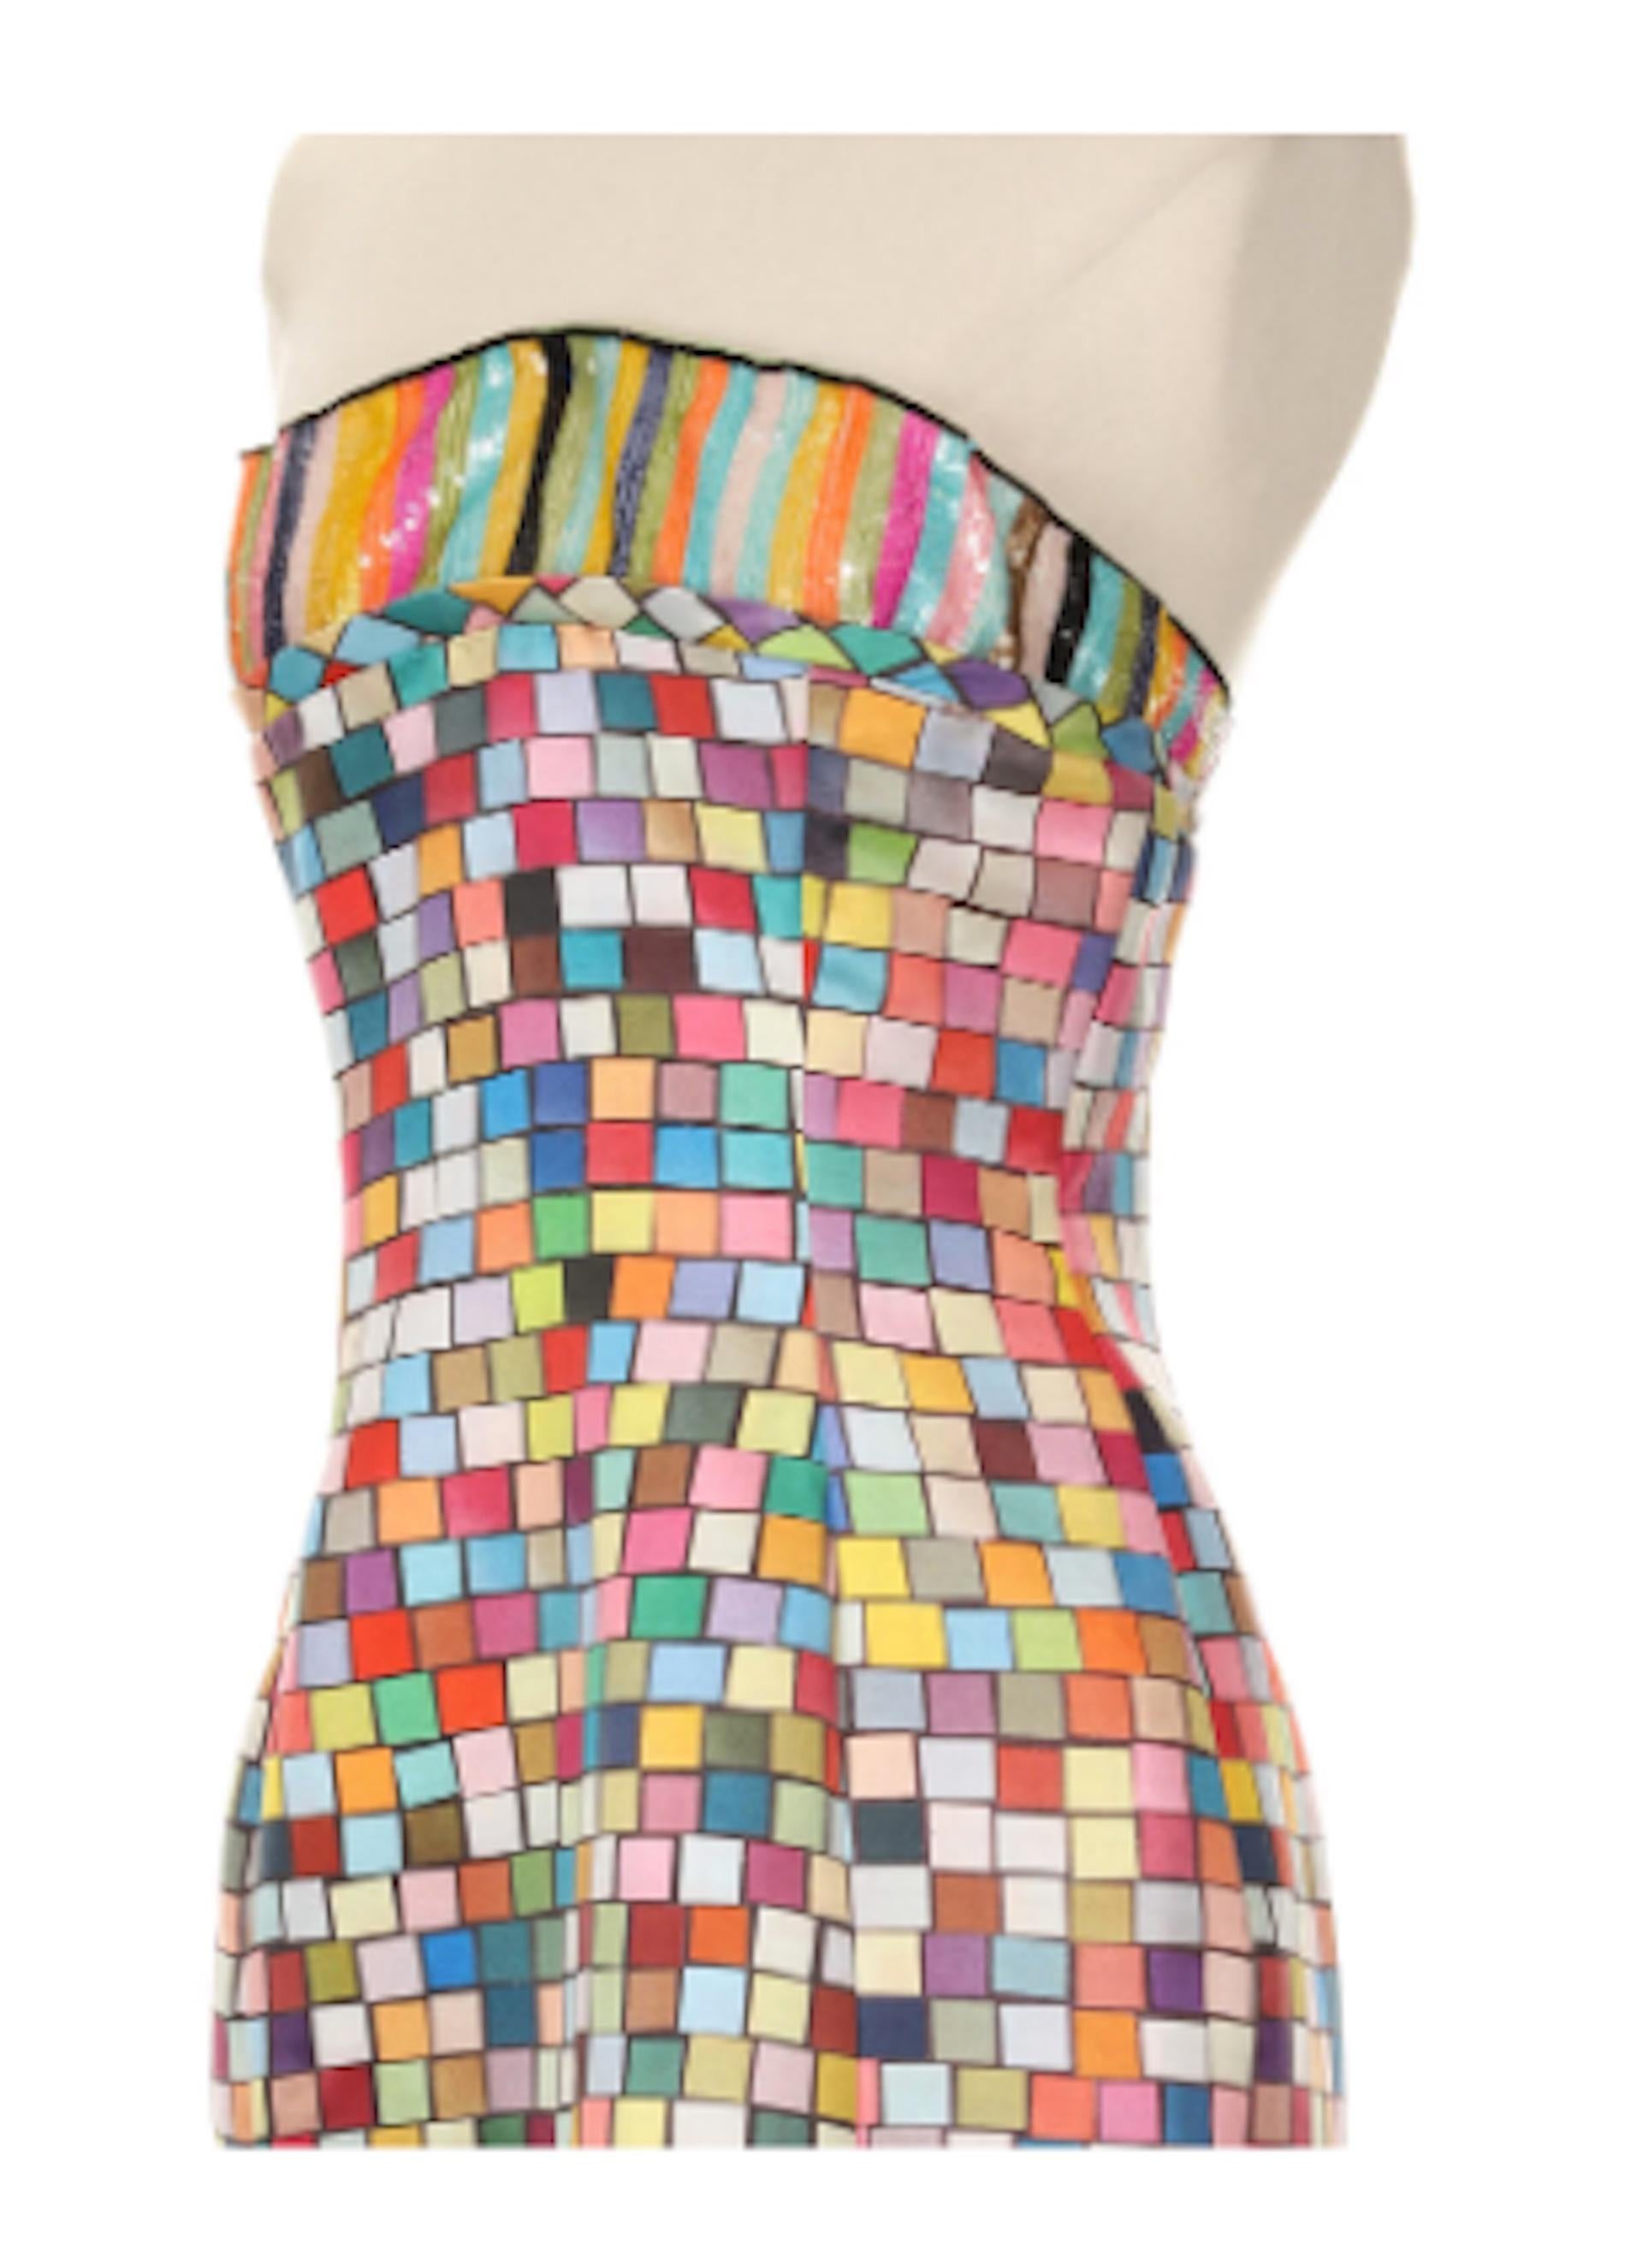 - Todd Oldham Embellished Rainbow Check Strapless Evening Dress. From the Spring 1996 Runway Collection and worn by Amber Valletta.Striking multicolored silk dress with structured corset top and sequin embellishment around the top of the bust.
-